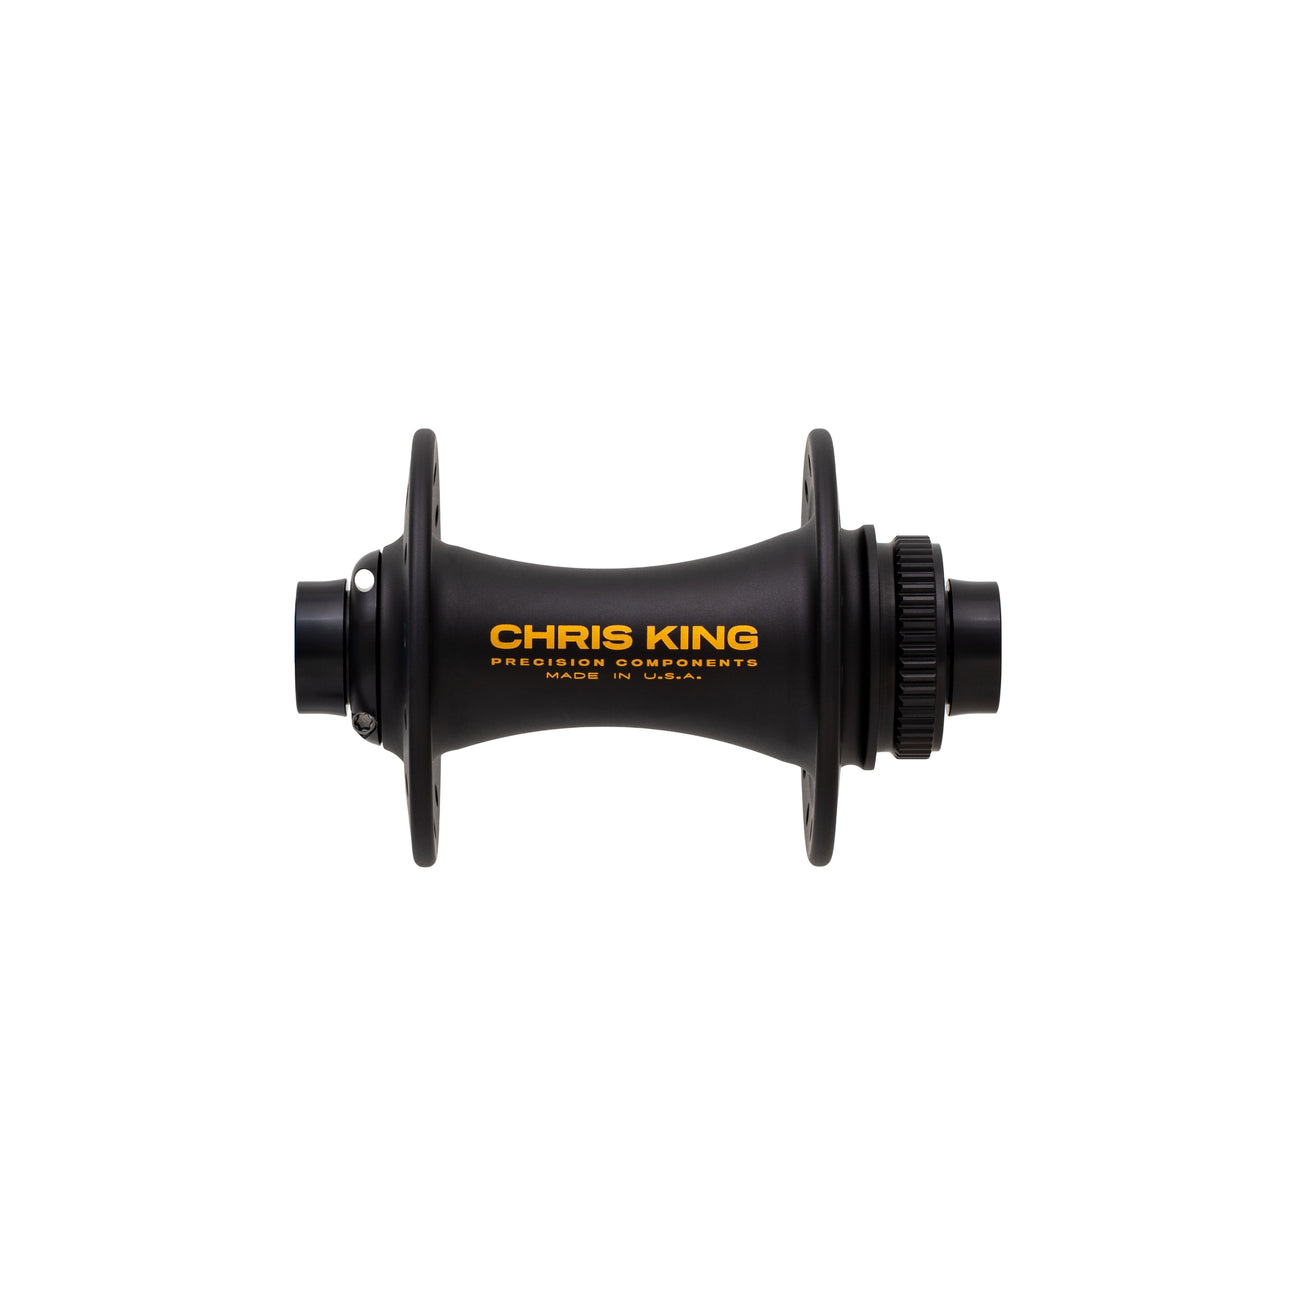 Chris King boost front hub in two tone black/gold